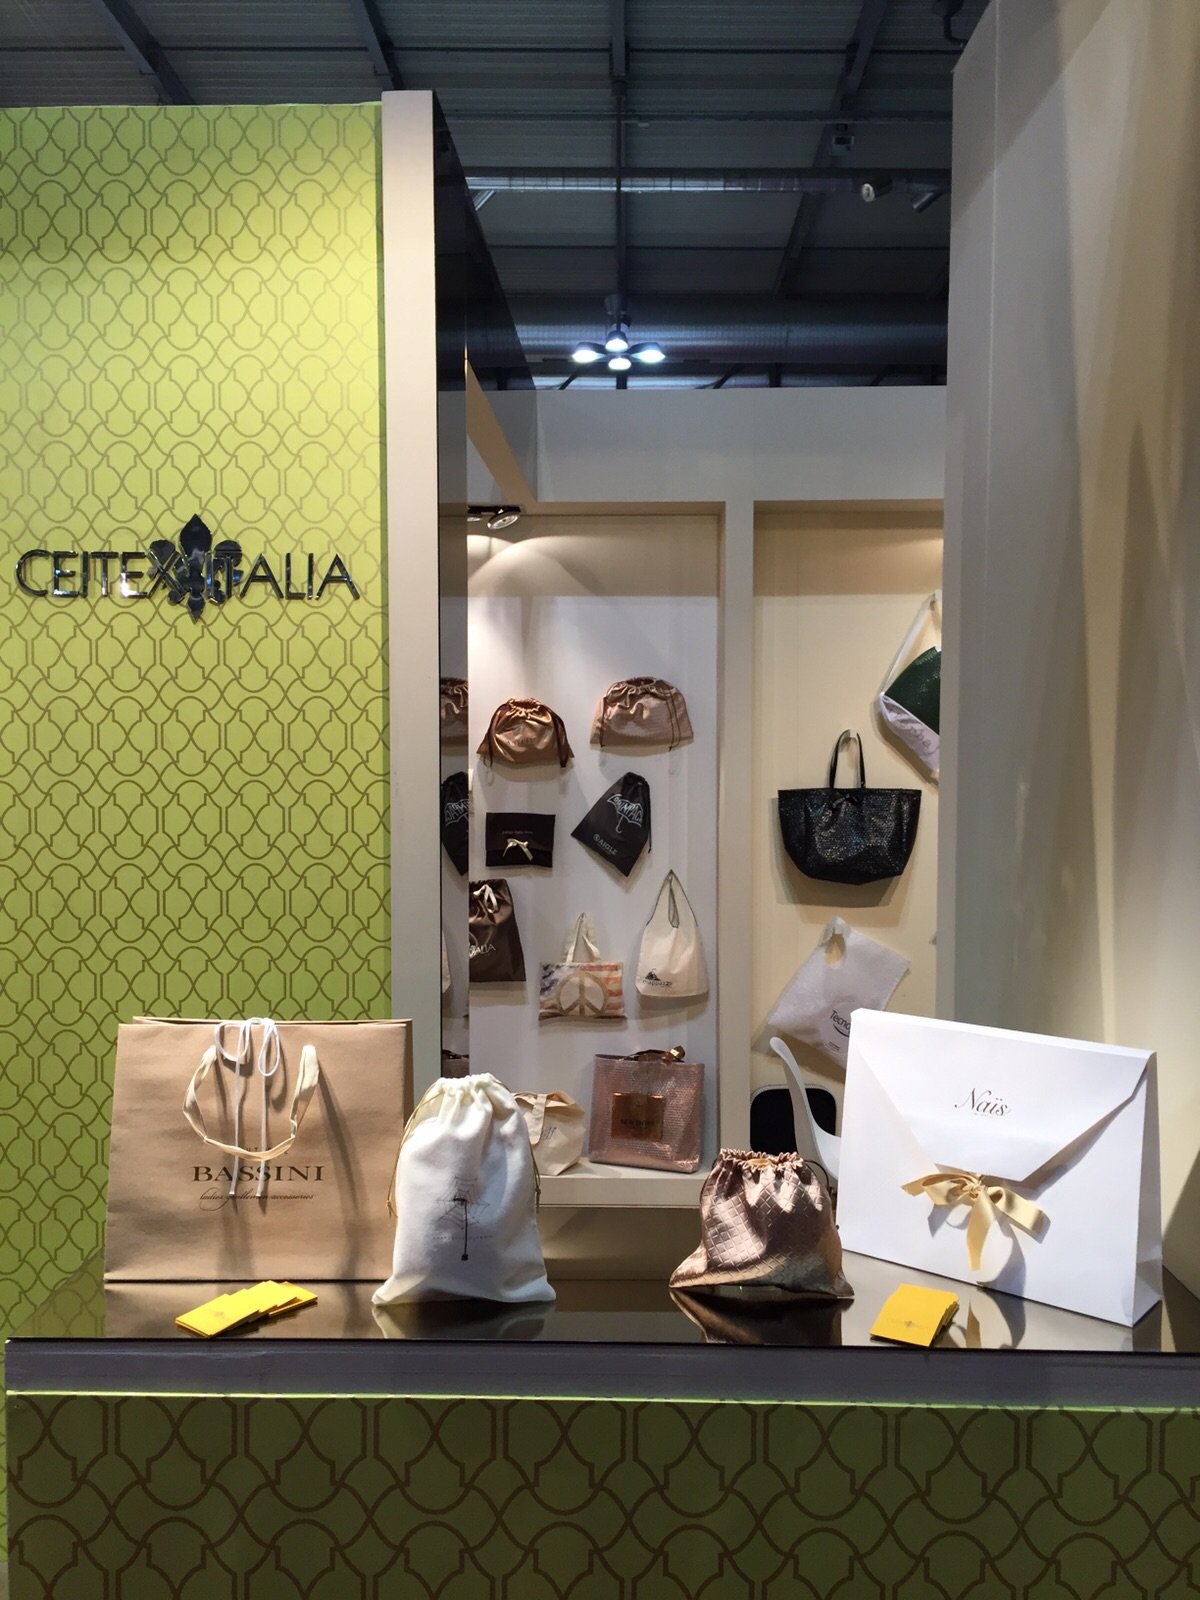 Ceitex Italia Stand at LineaPelle